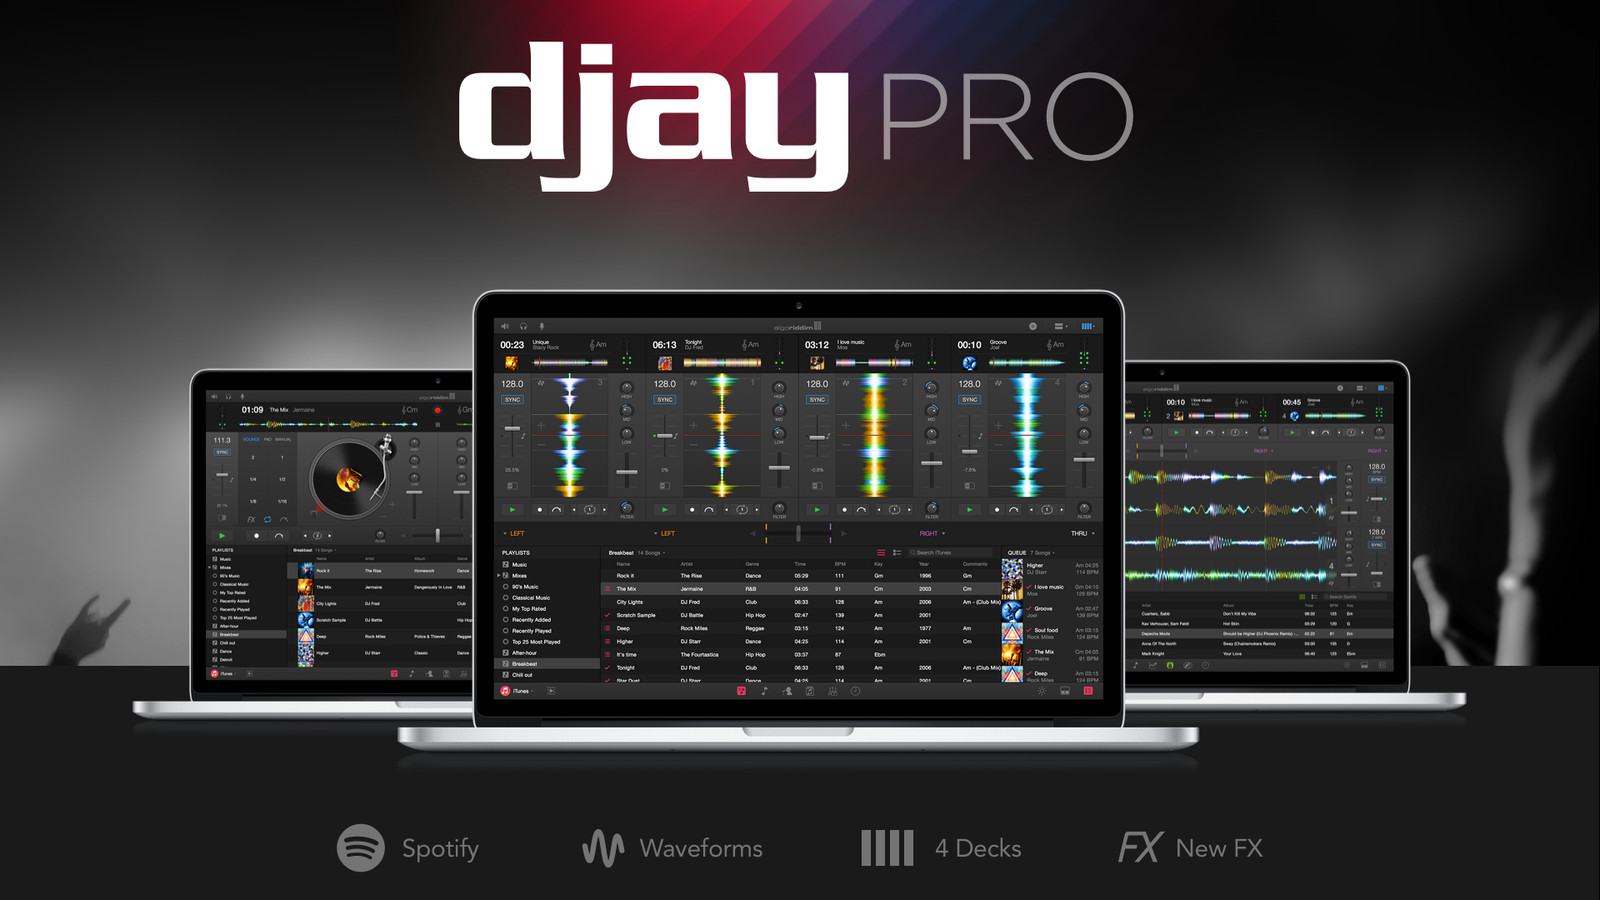 How To Logout Of Spotify On Djay Pro Mac